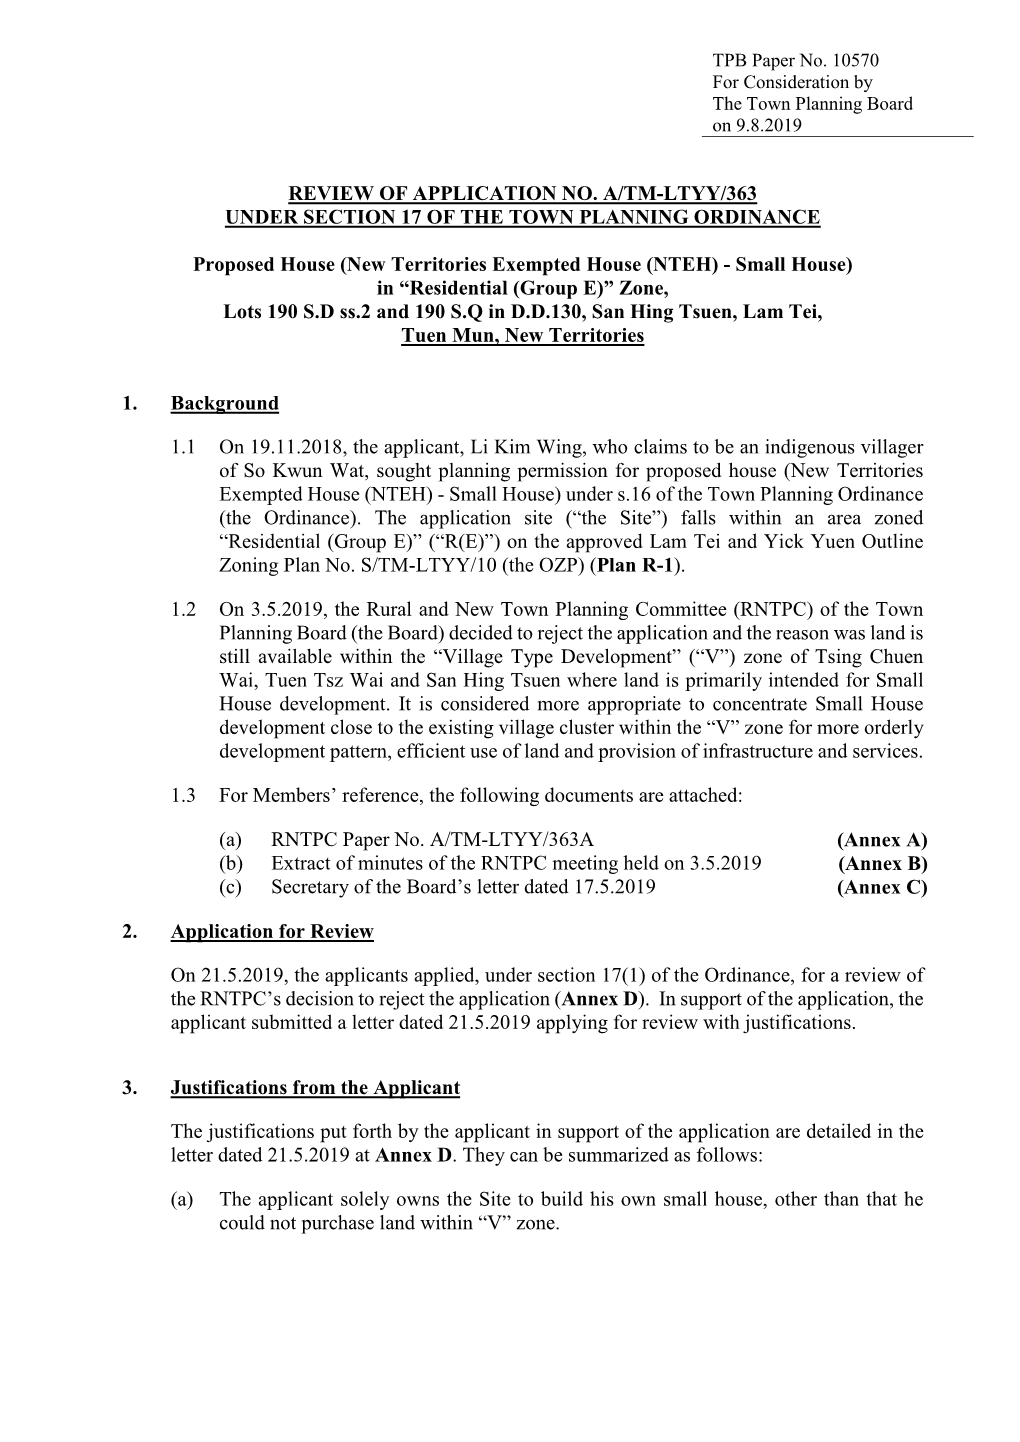 Review of Application No. A/Tm-Ltyy/363 Under Section 17 of the Town Planning Ordinance